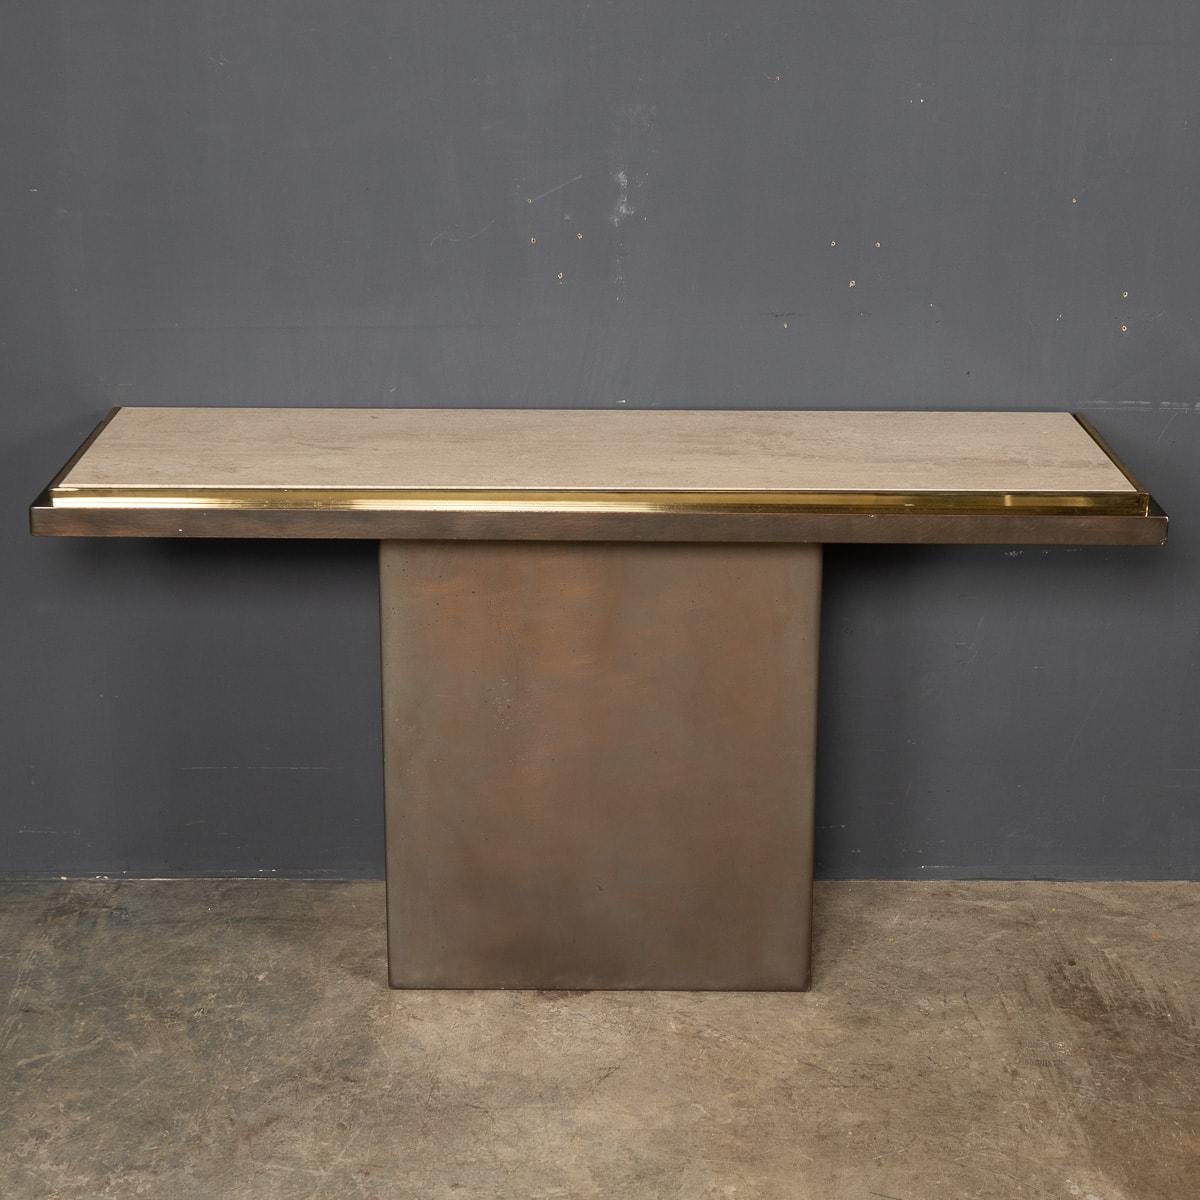 A stunning mid 20th century Belgian made console table. This table has been crafted out of bronze, brass and marble. The base is made from bronze with a brass frame surrounding the travertine marble top.

CONDITION
In Great Condition - No